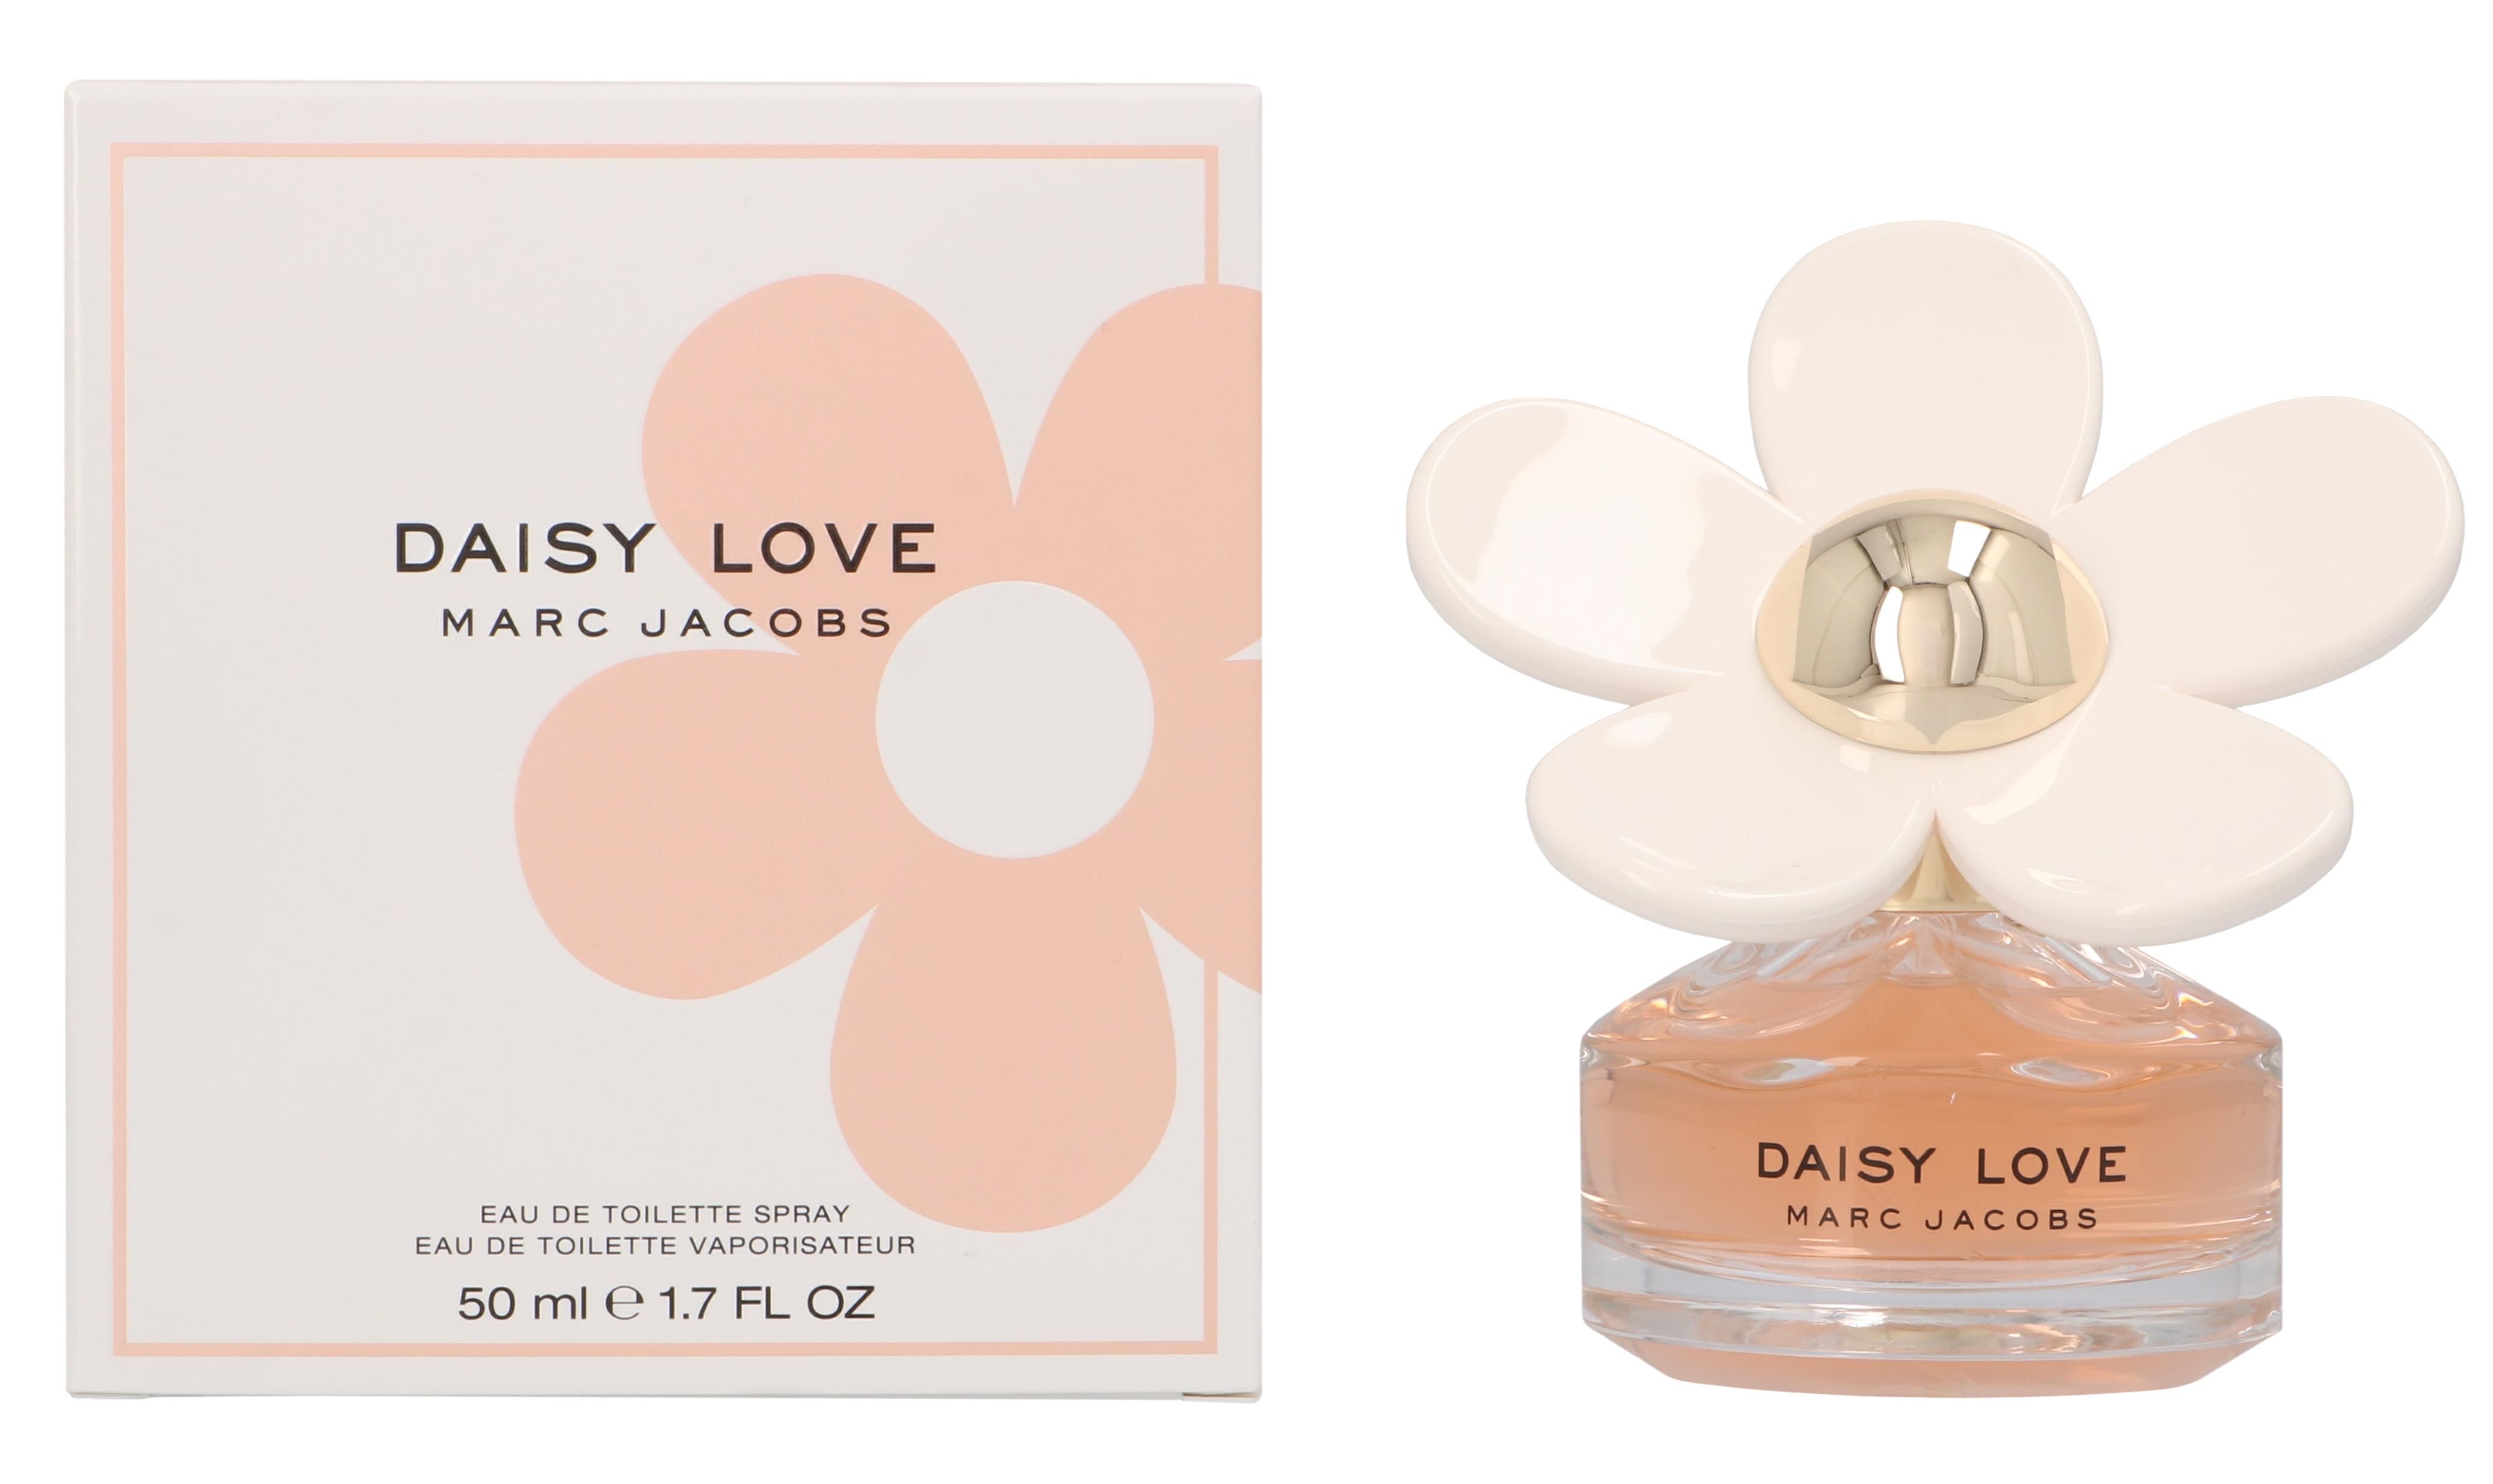 Daisy Love is a floral woody musk fragrance for women. The fragrance was created by perfuming great Alberto Morillas and launched in 2018 by Marc Jacobs. The fragrance opens with a top note of Cloudberry, has a heart note of Daisy and base notes of Cashmere Musk and Driftwood. The note create a sweet, lovely and light floral scent, ideal for the warmer weather of Spring and Summer time.